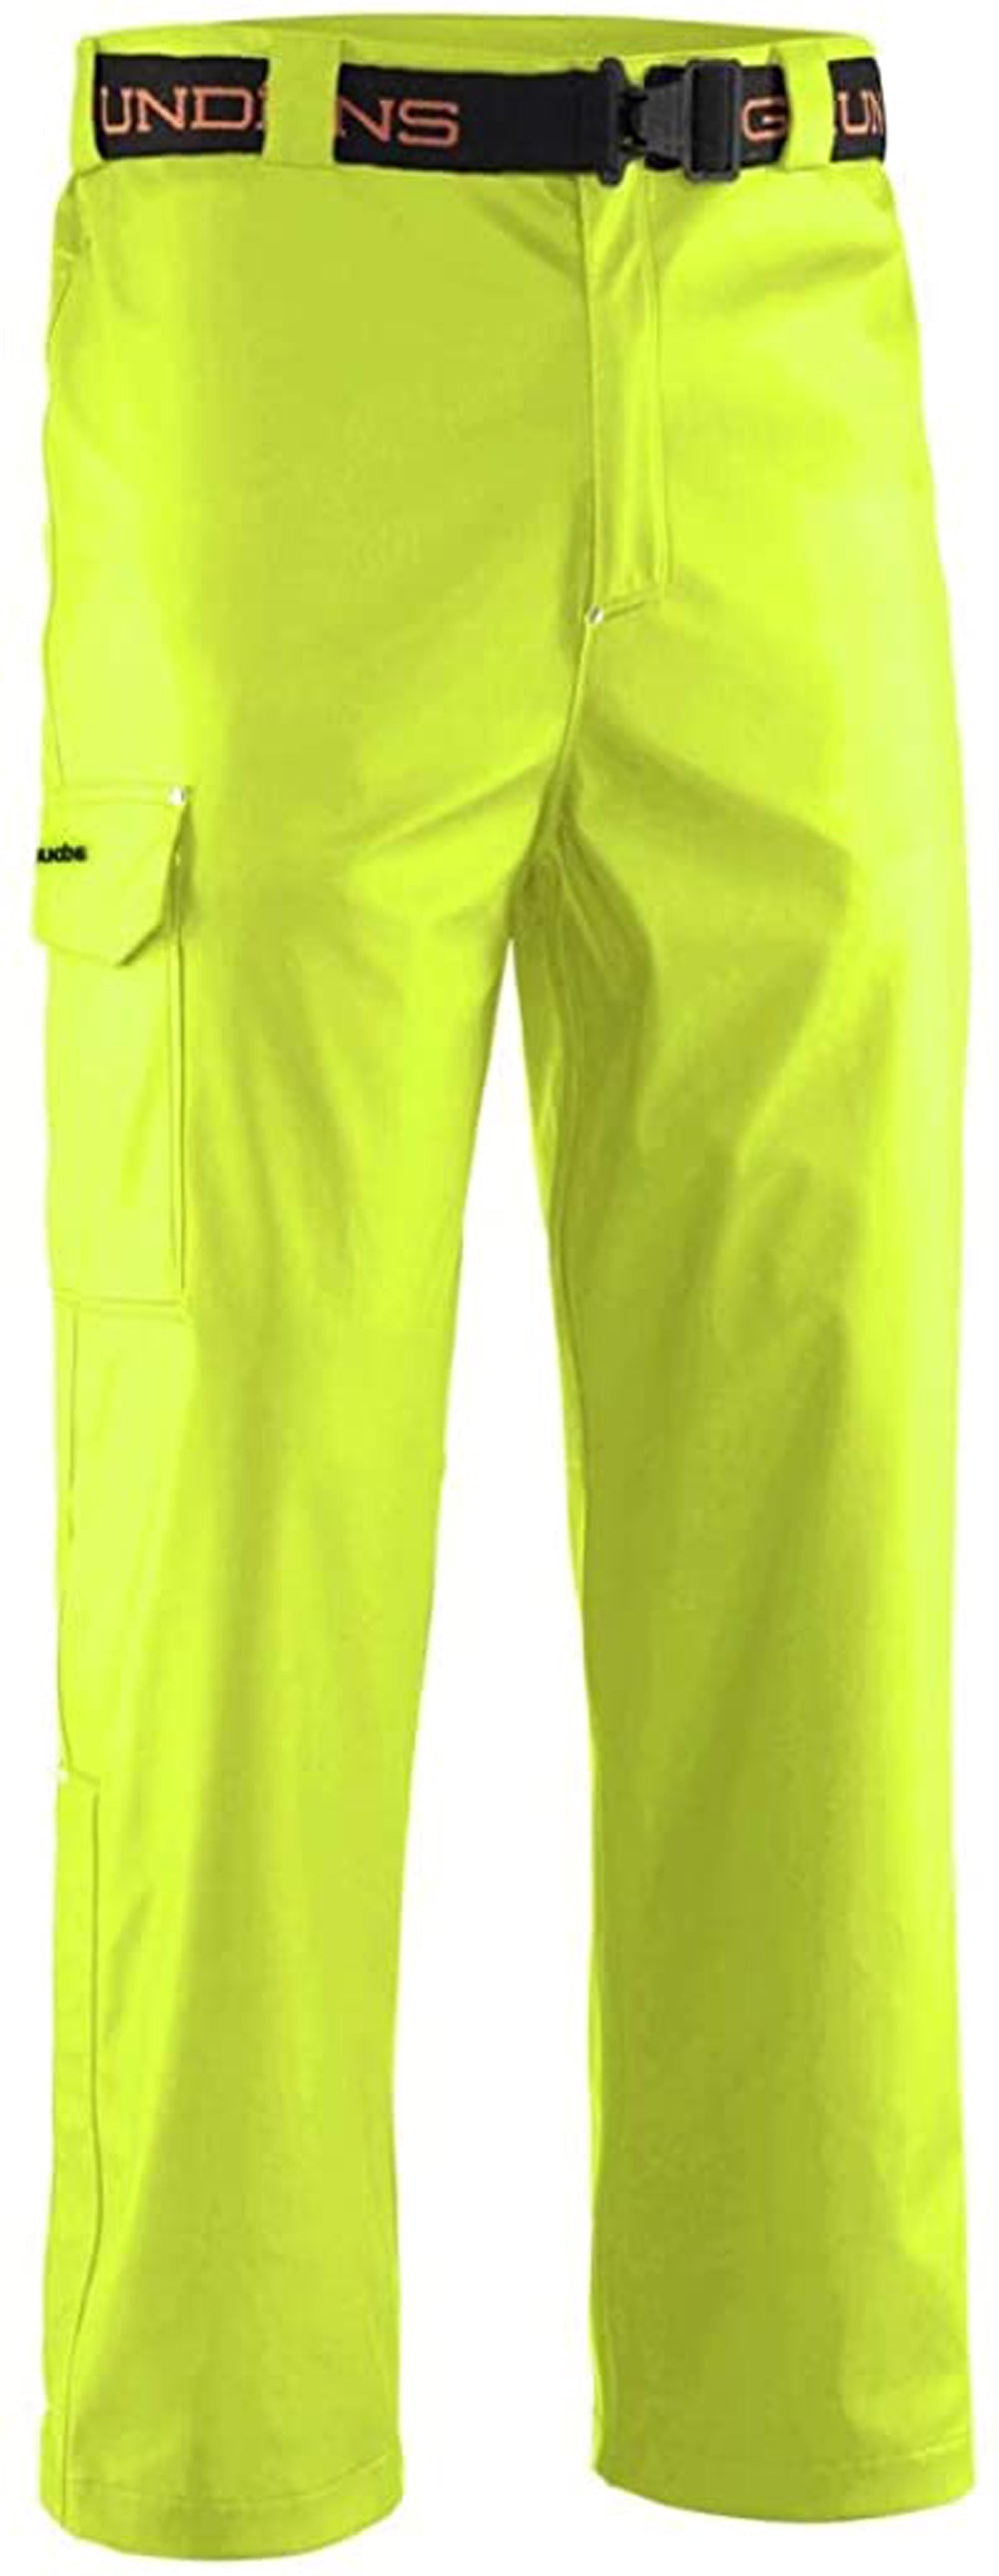 Neptune Pant in Hi Vis Yellow color from the front view